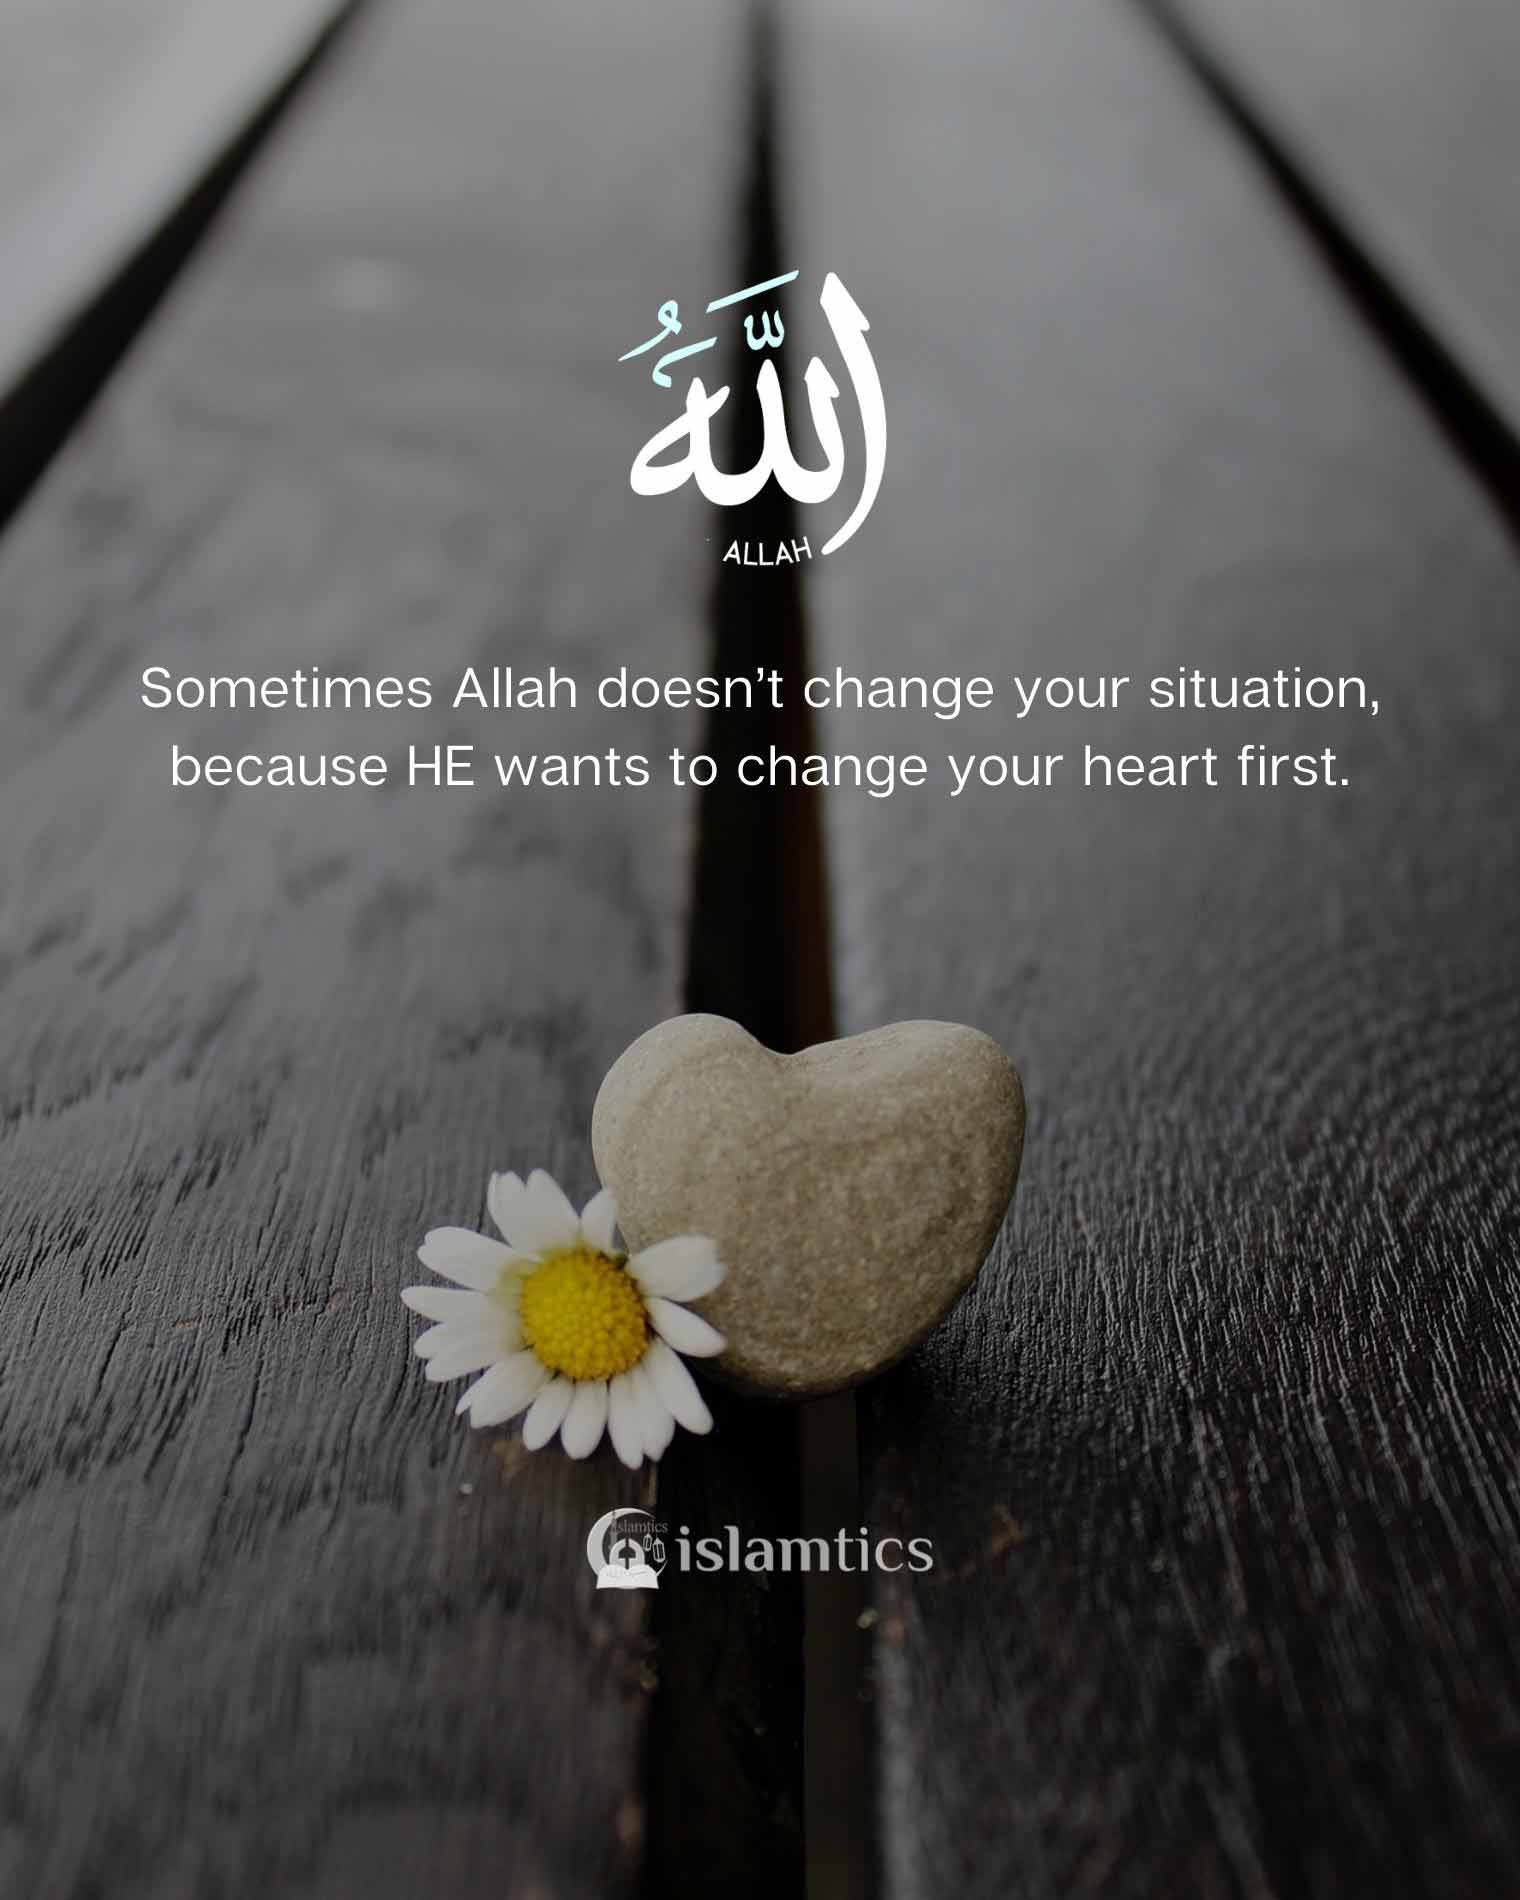  Sometimes Allah doesn’t change your situation, because Allah wants to change your heart first.